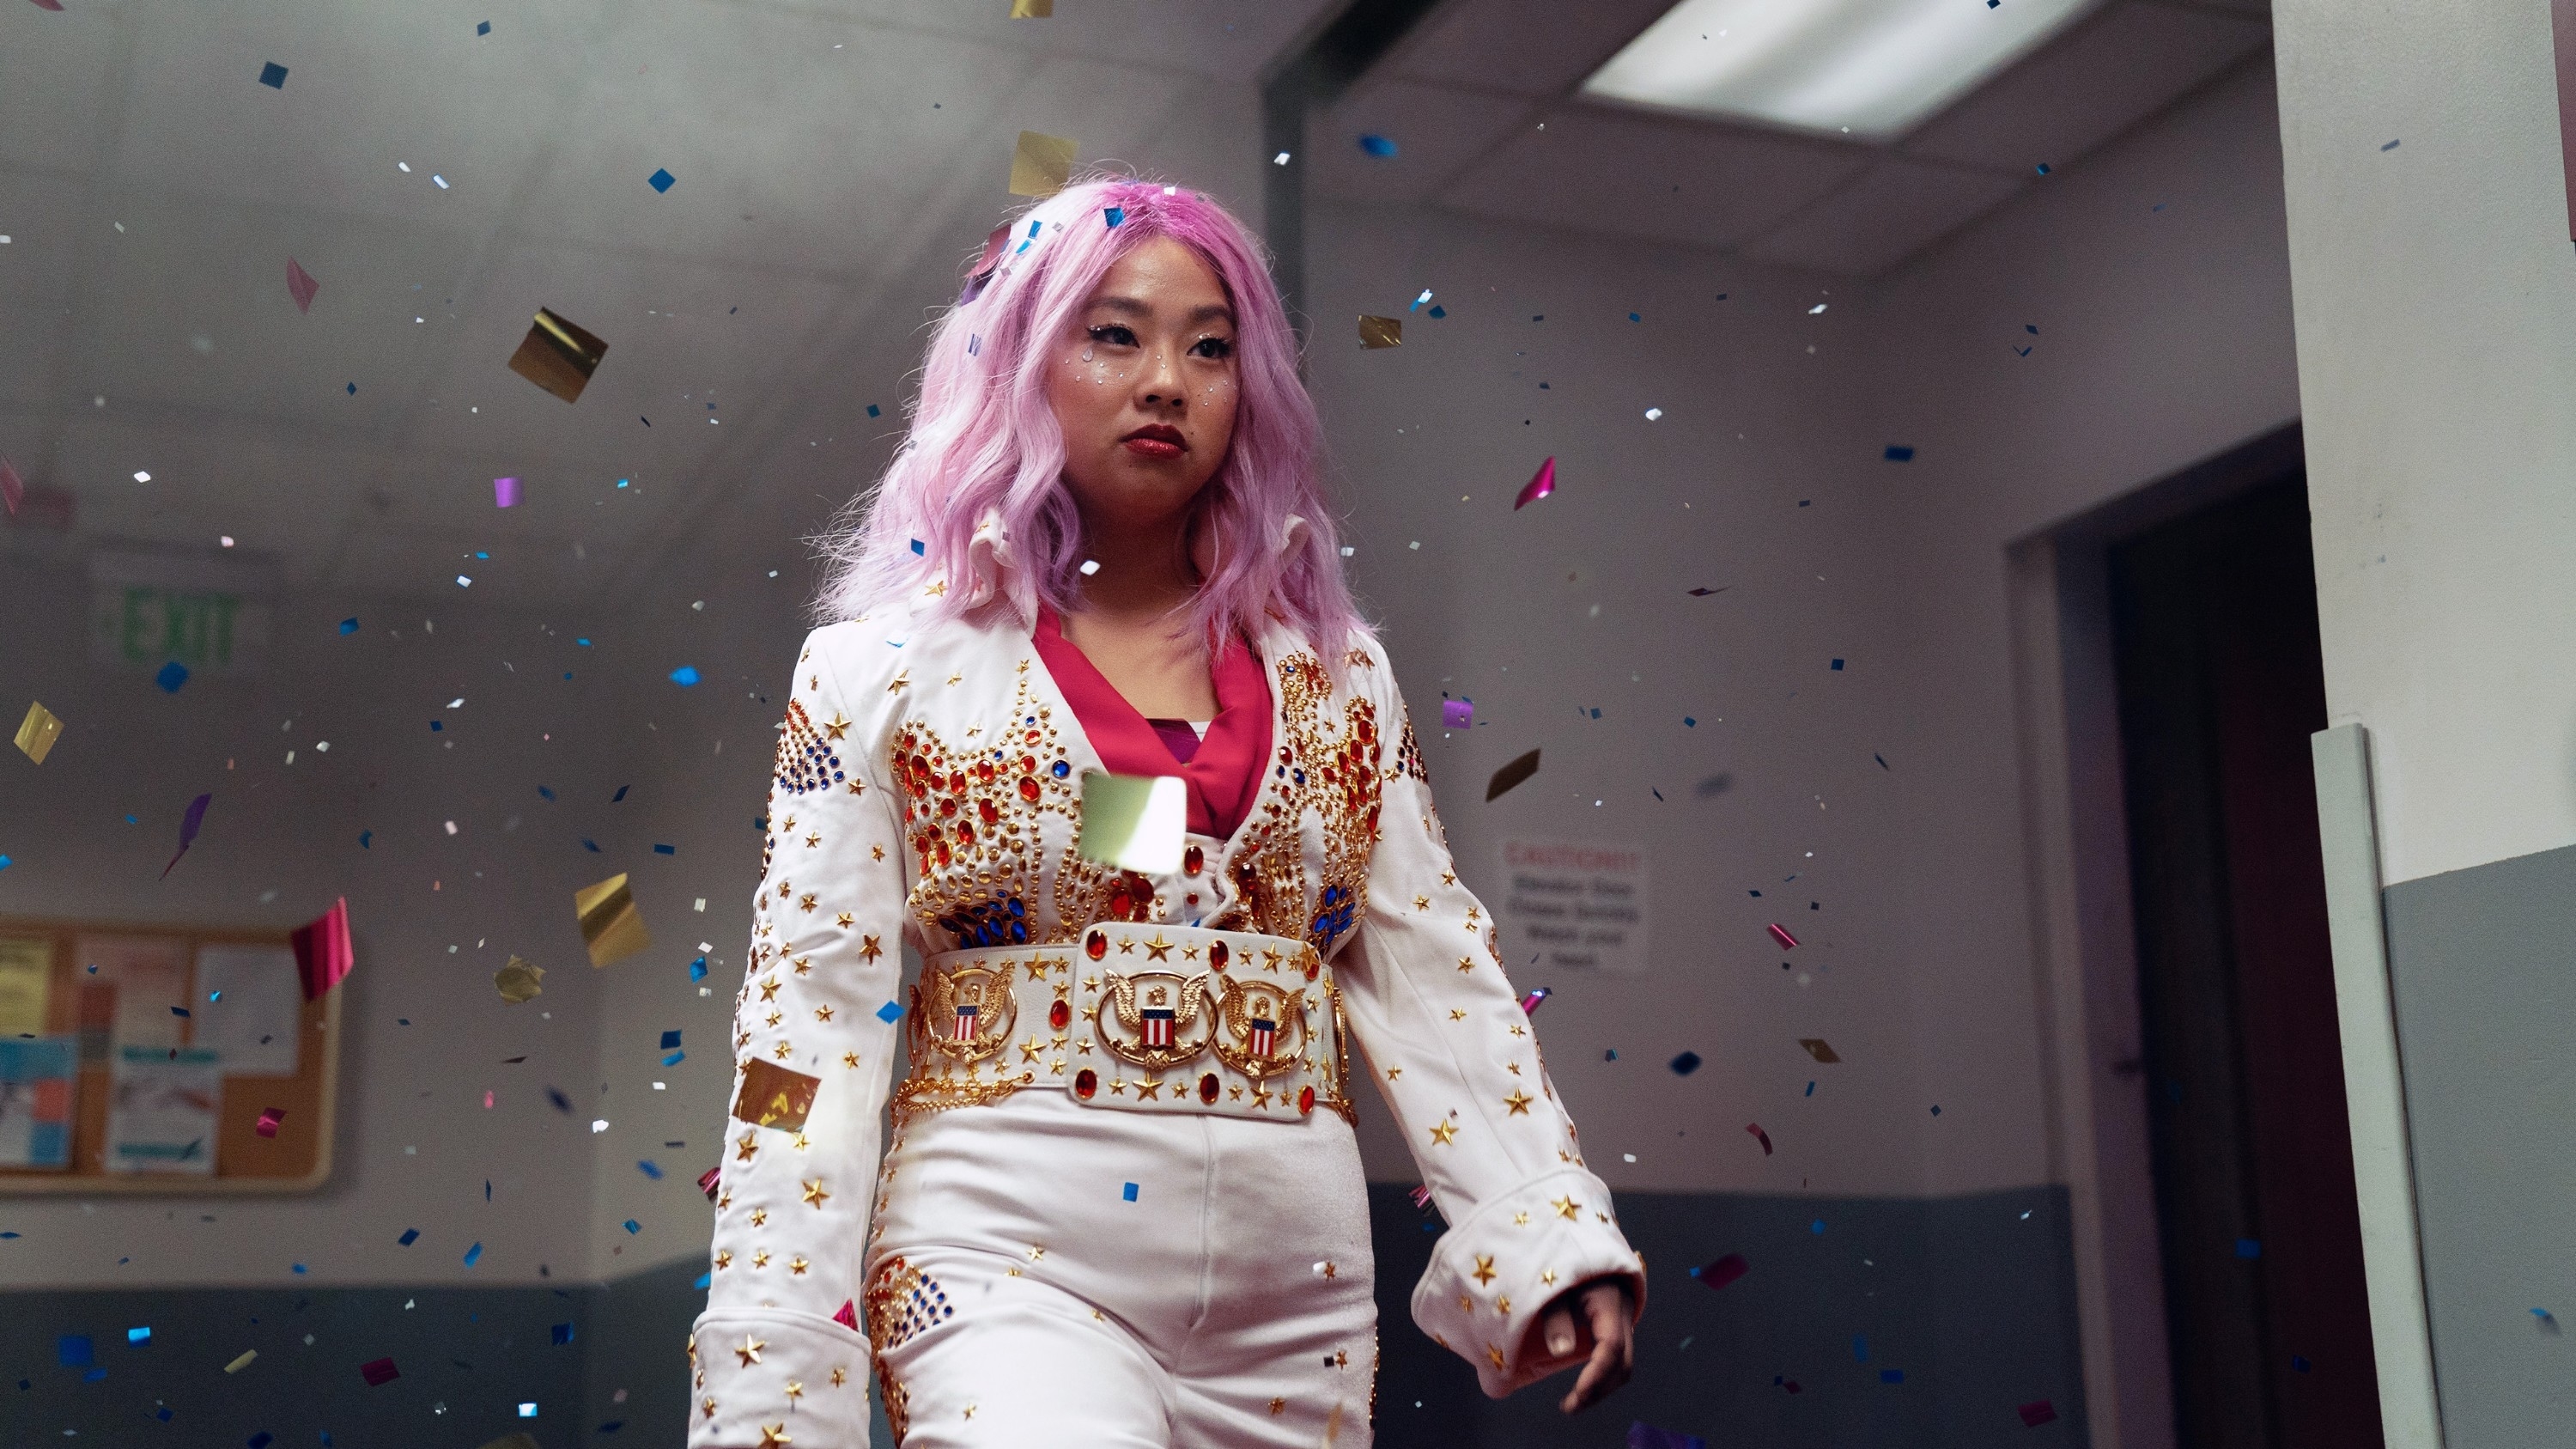 Stephanie Hsu in a bedazzled white suit with a pink undertone walking amid falling confetti